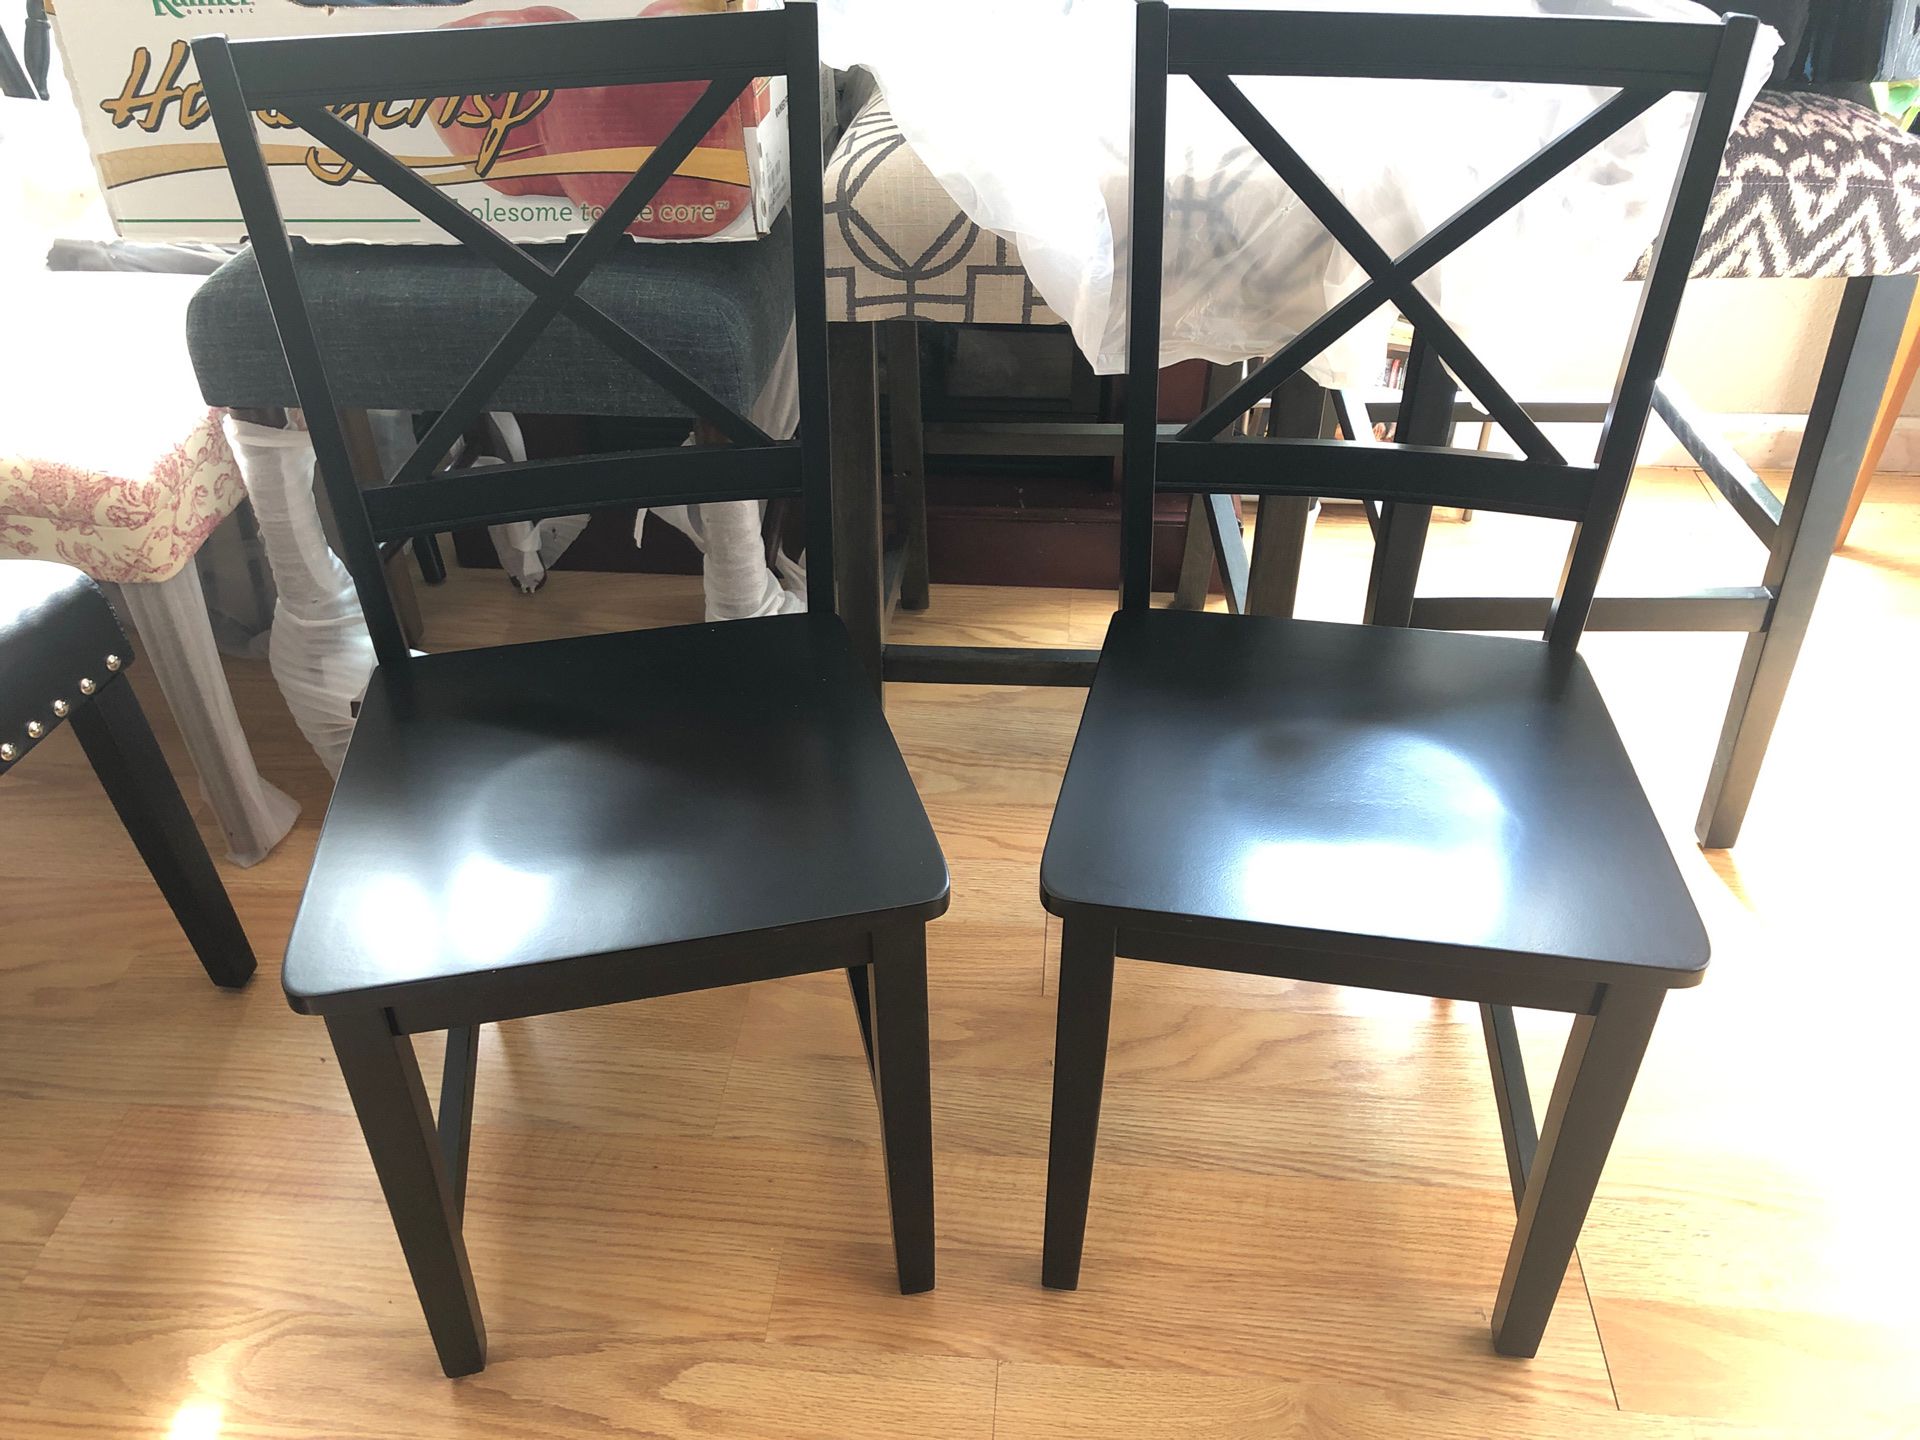 New Ladderback Wooden Chairs (set of 2)